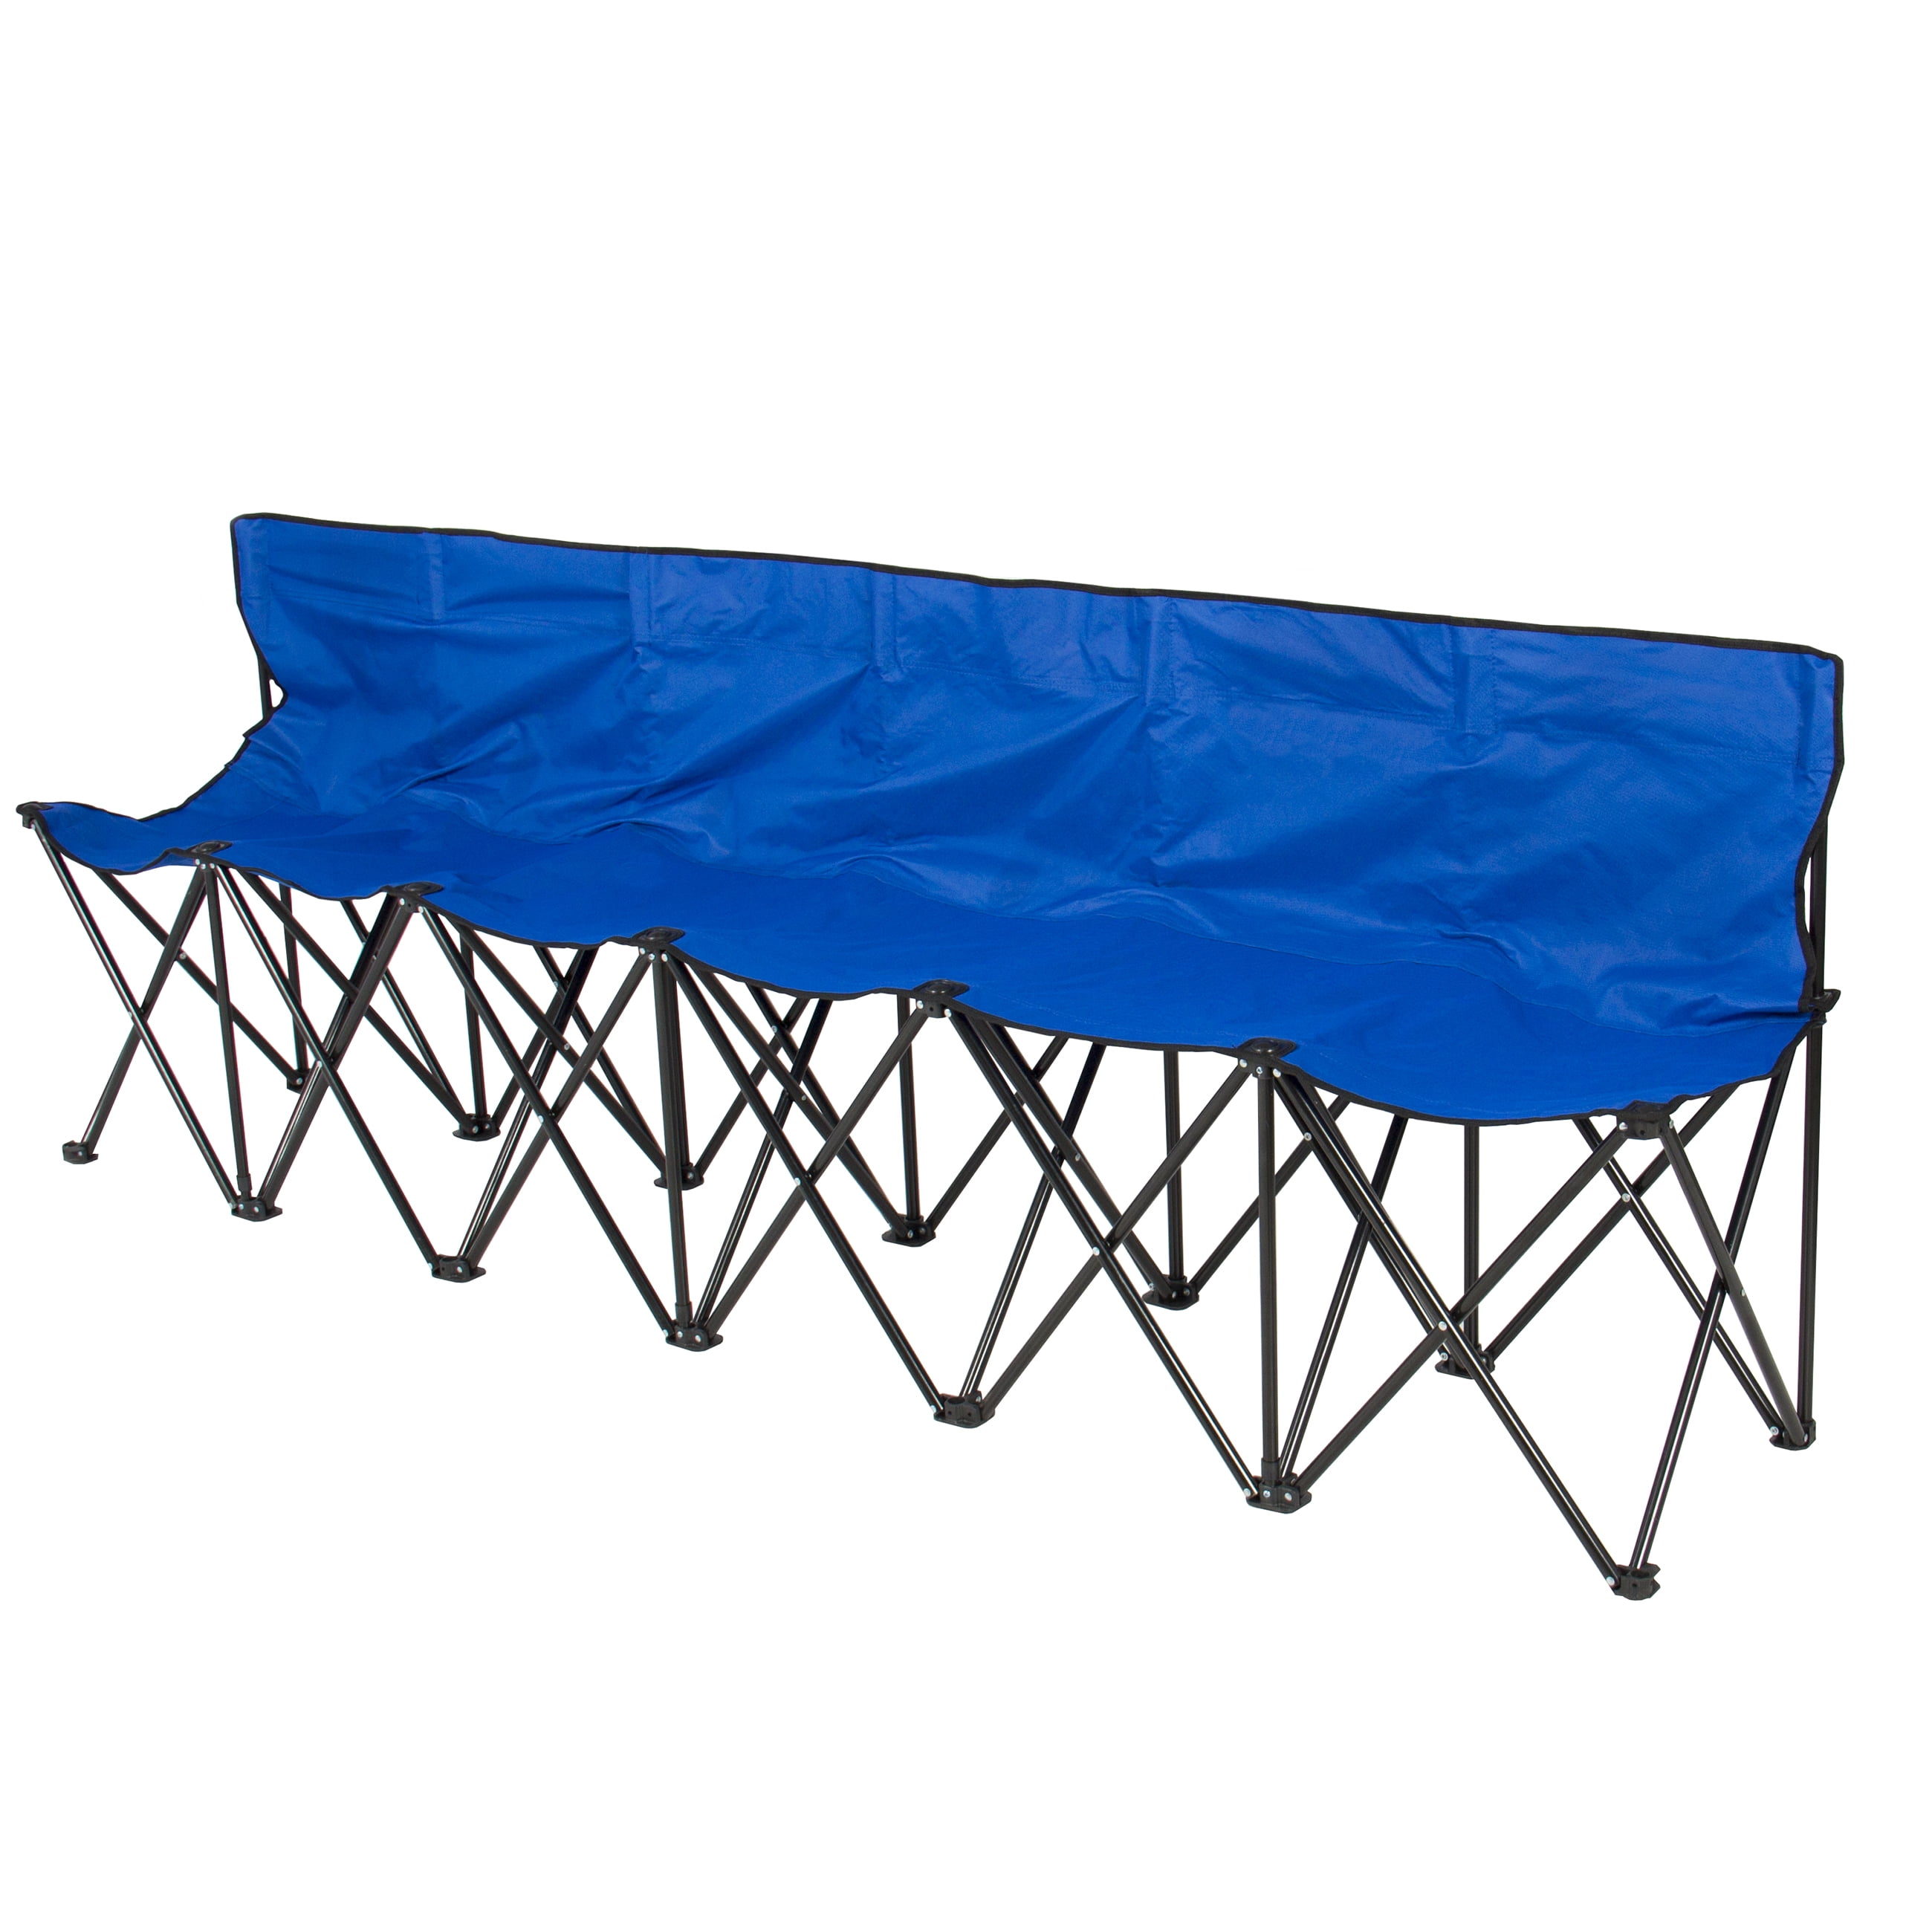 Best Choice Products 6 Seat Portable Folding Bench For Camping Sports Sideline W Steel Tube Frame Carry Case Blue Walmart Com Walmart Com